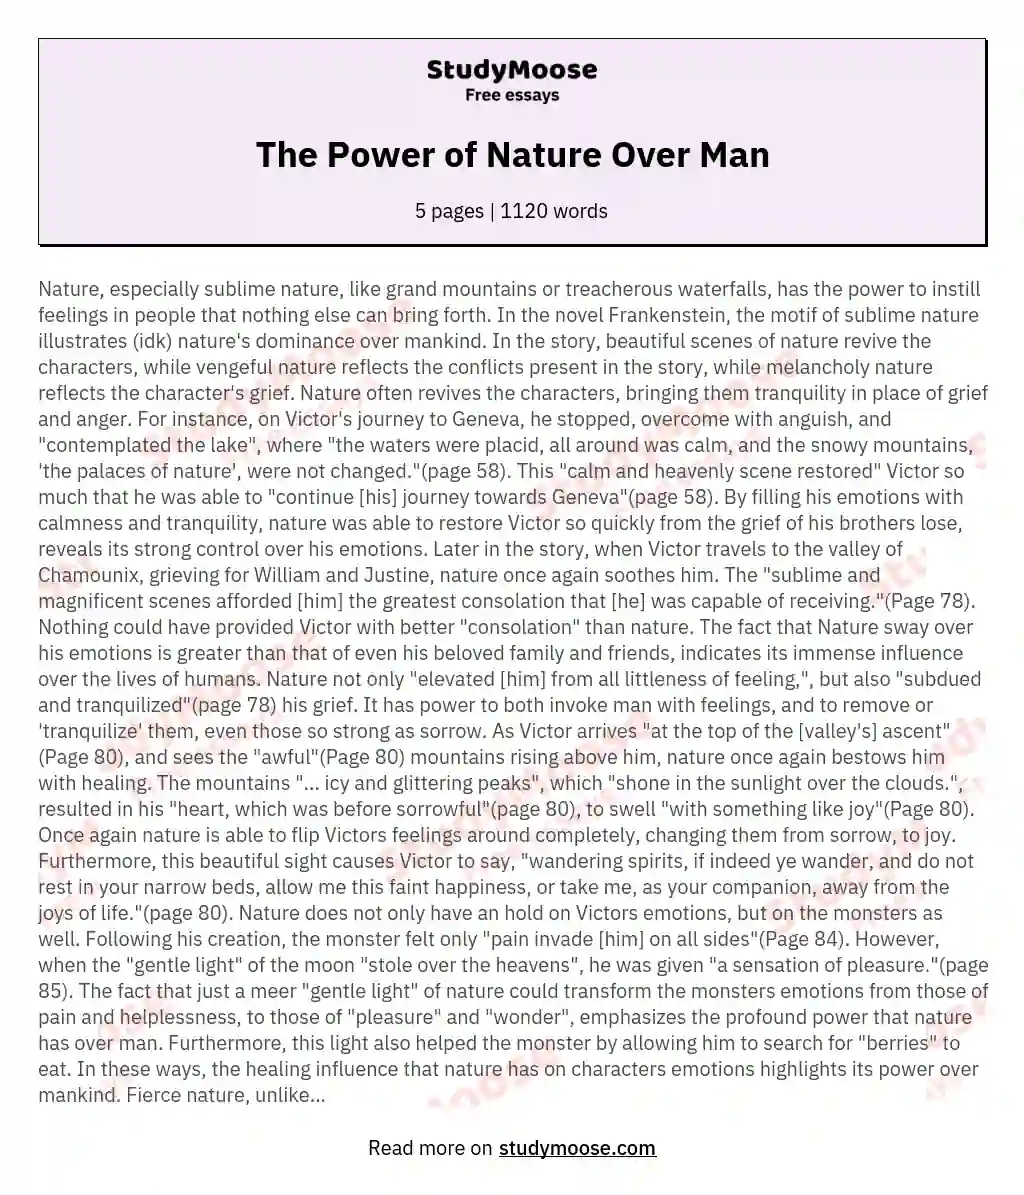 The Power of Nature Over Man essay